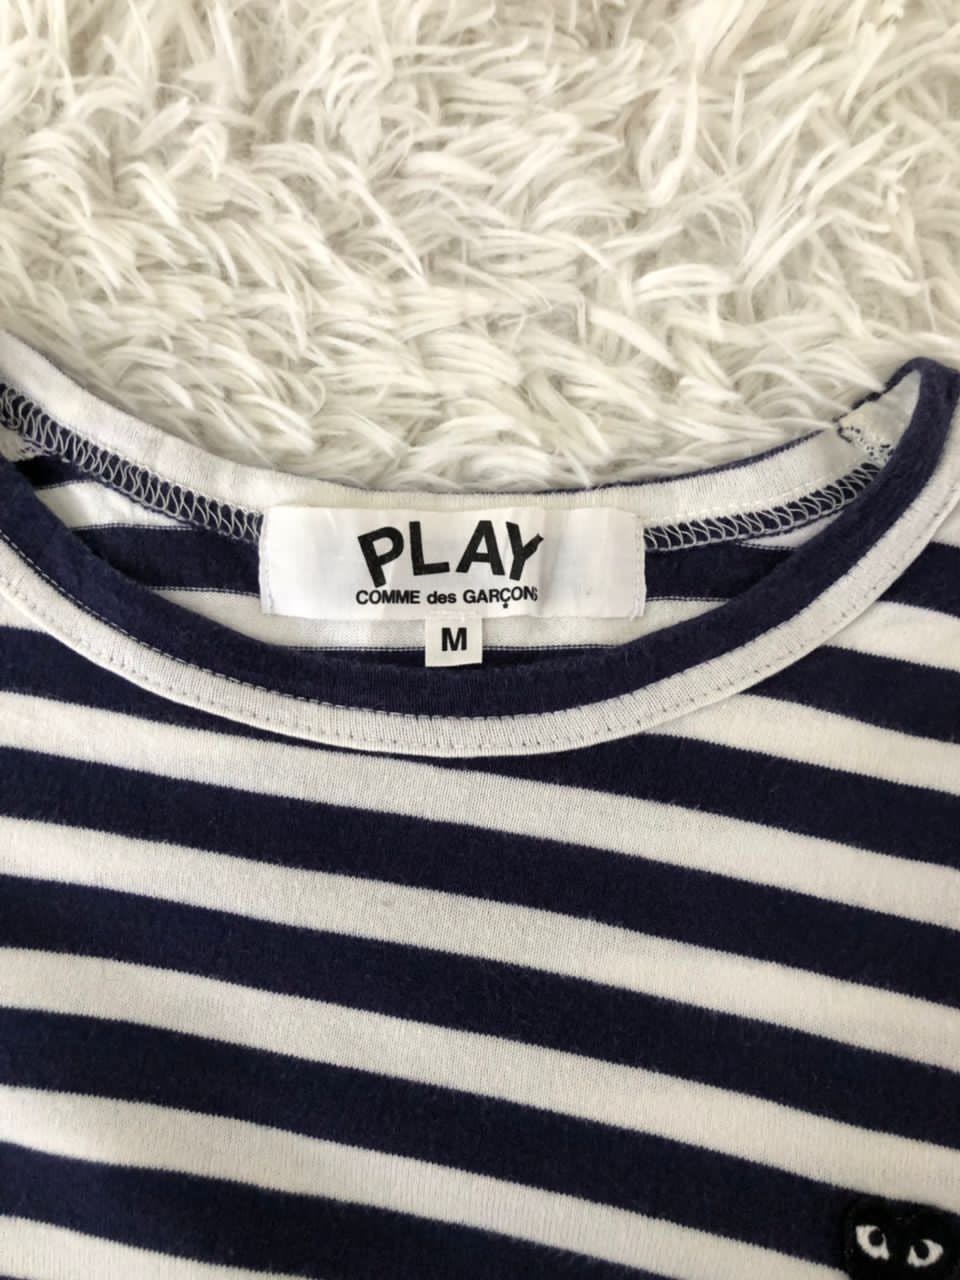 Comme des garcons play tshirt - 6